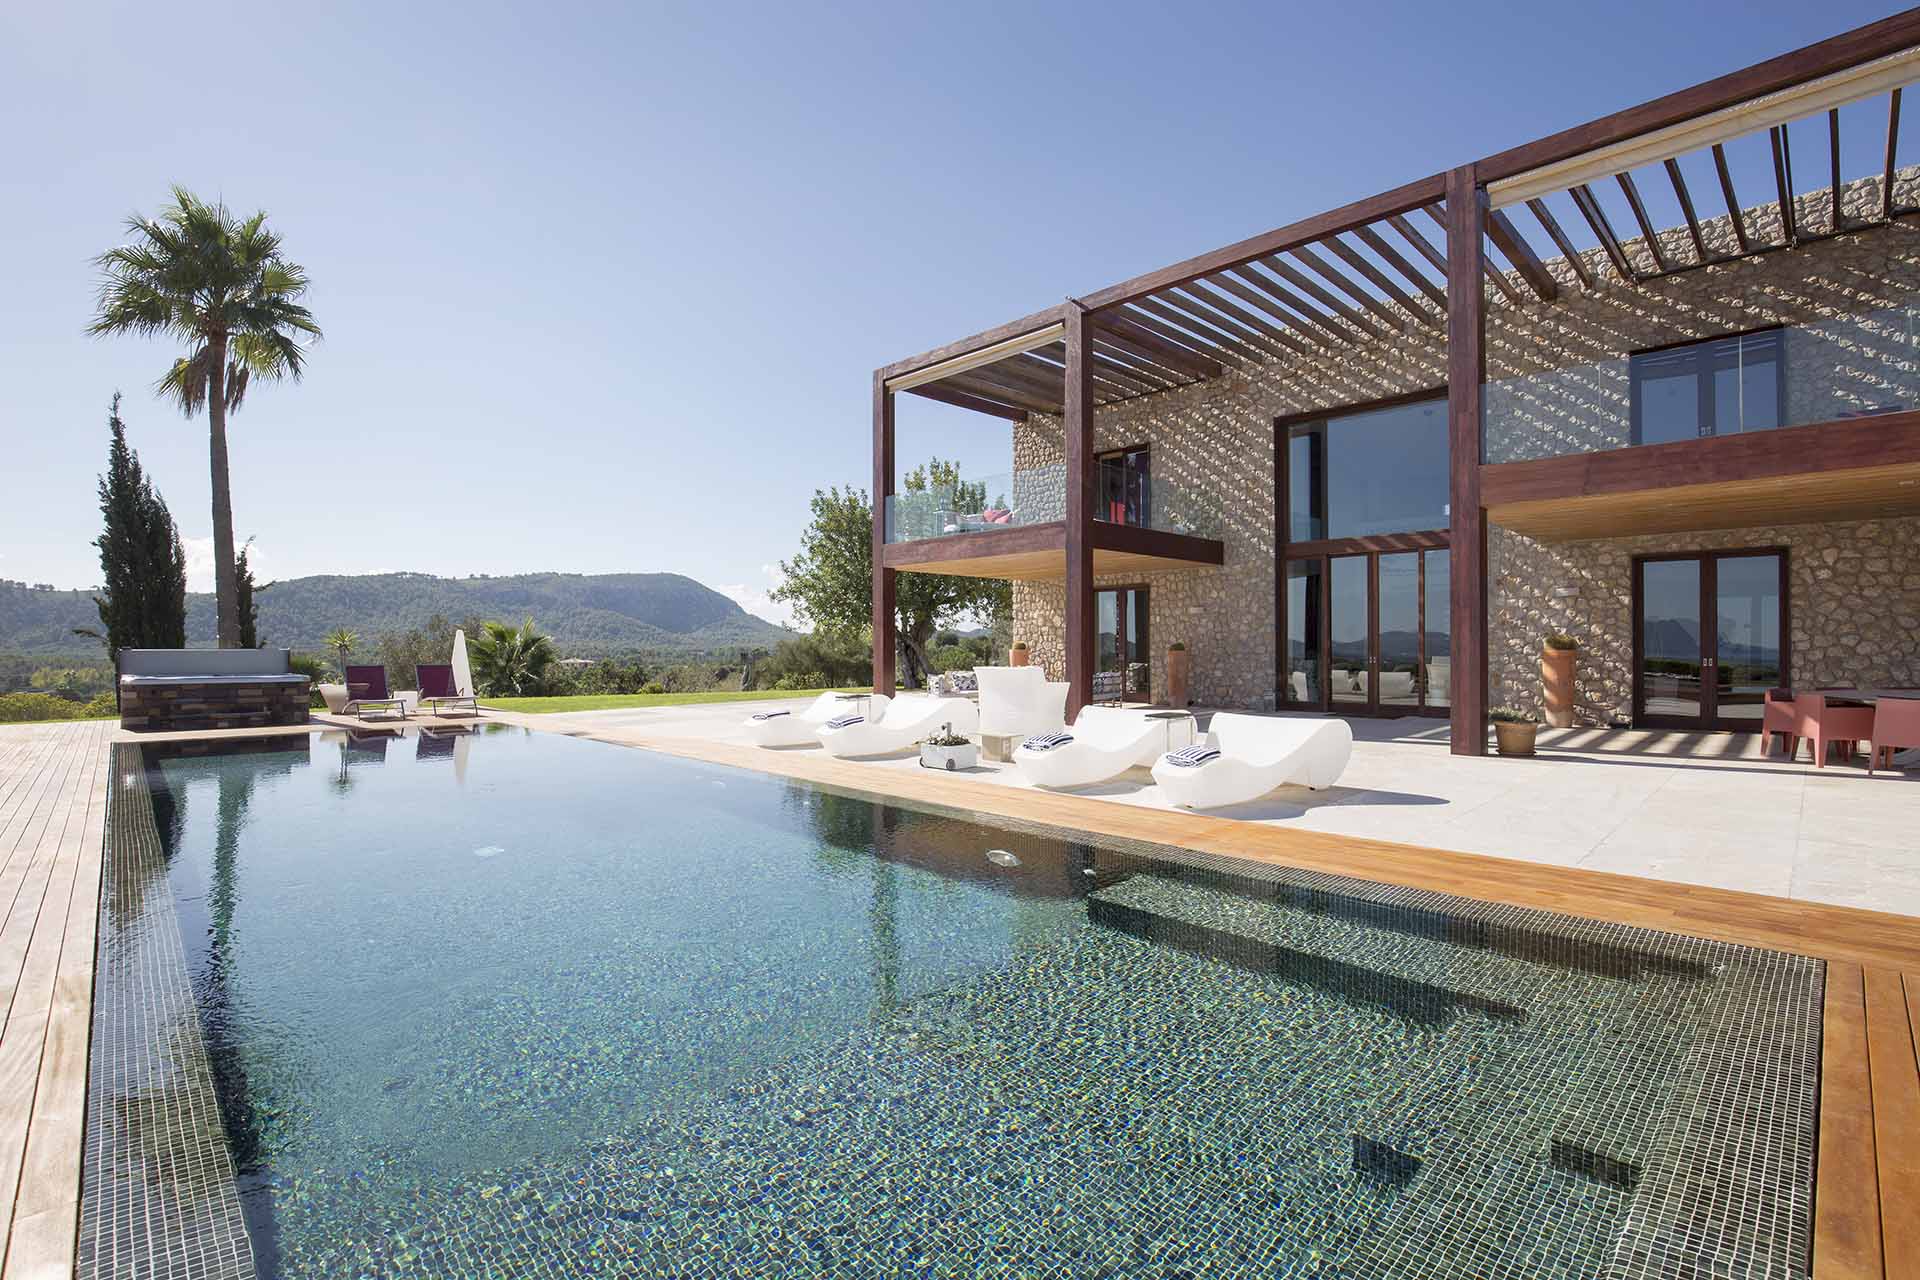 Large and luxurious villa in the north of the island of Mallorca, Puerto Pollensa